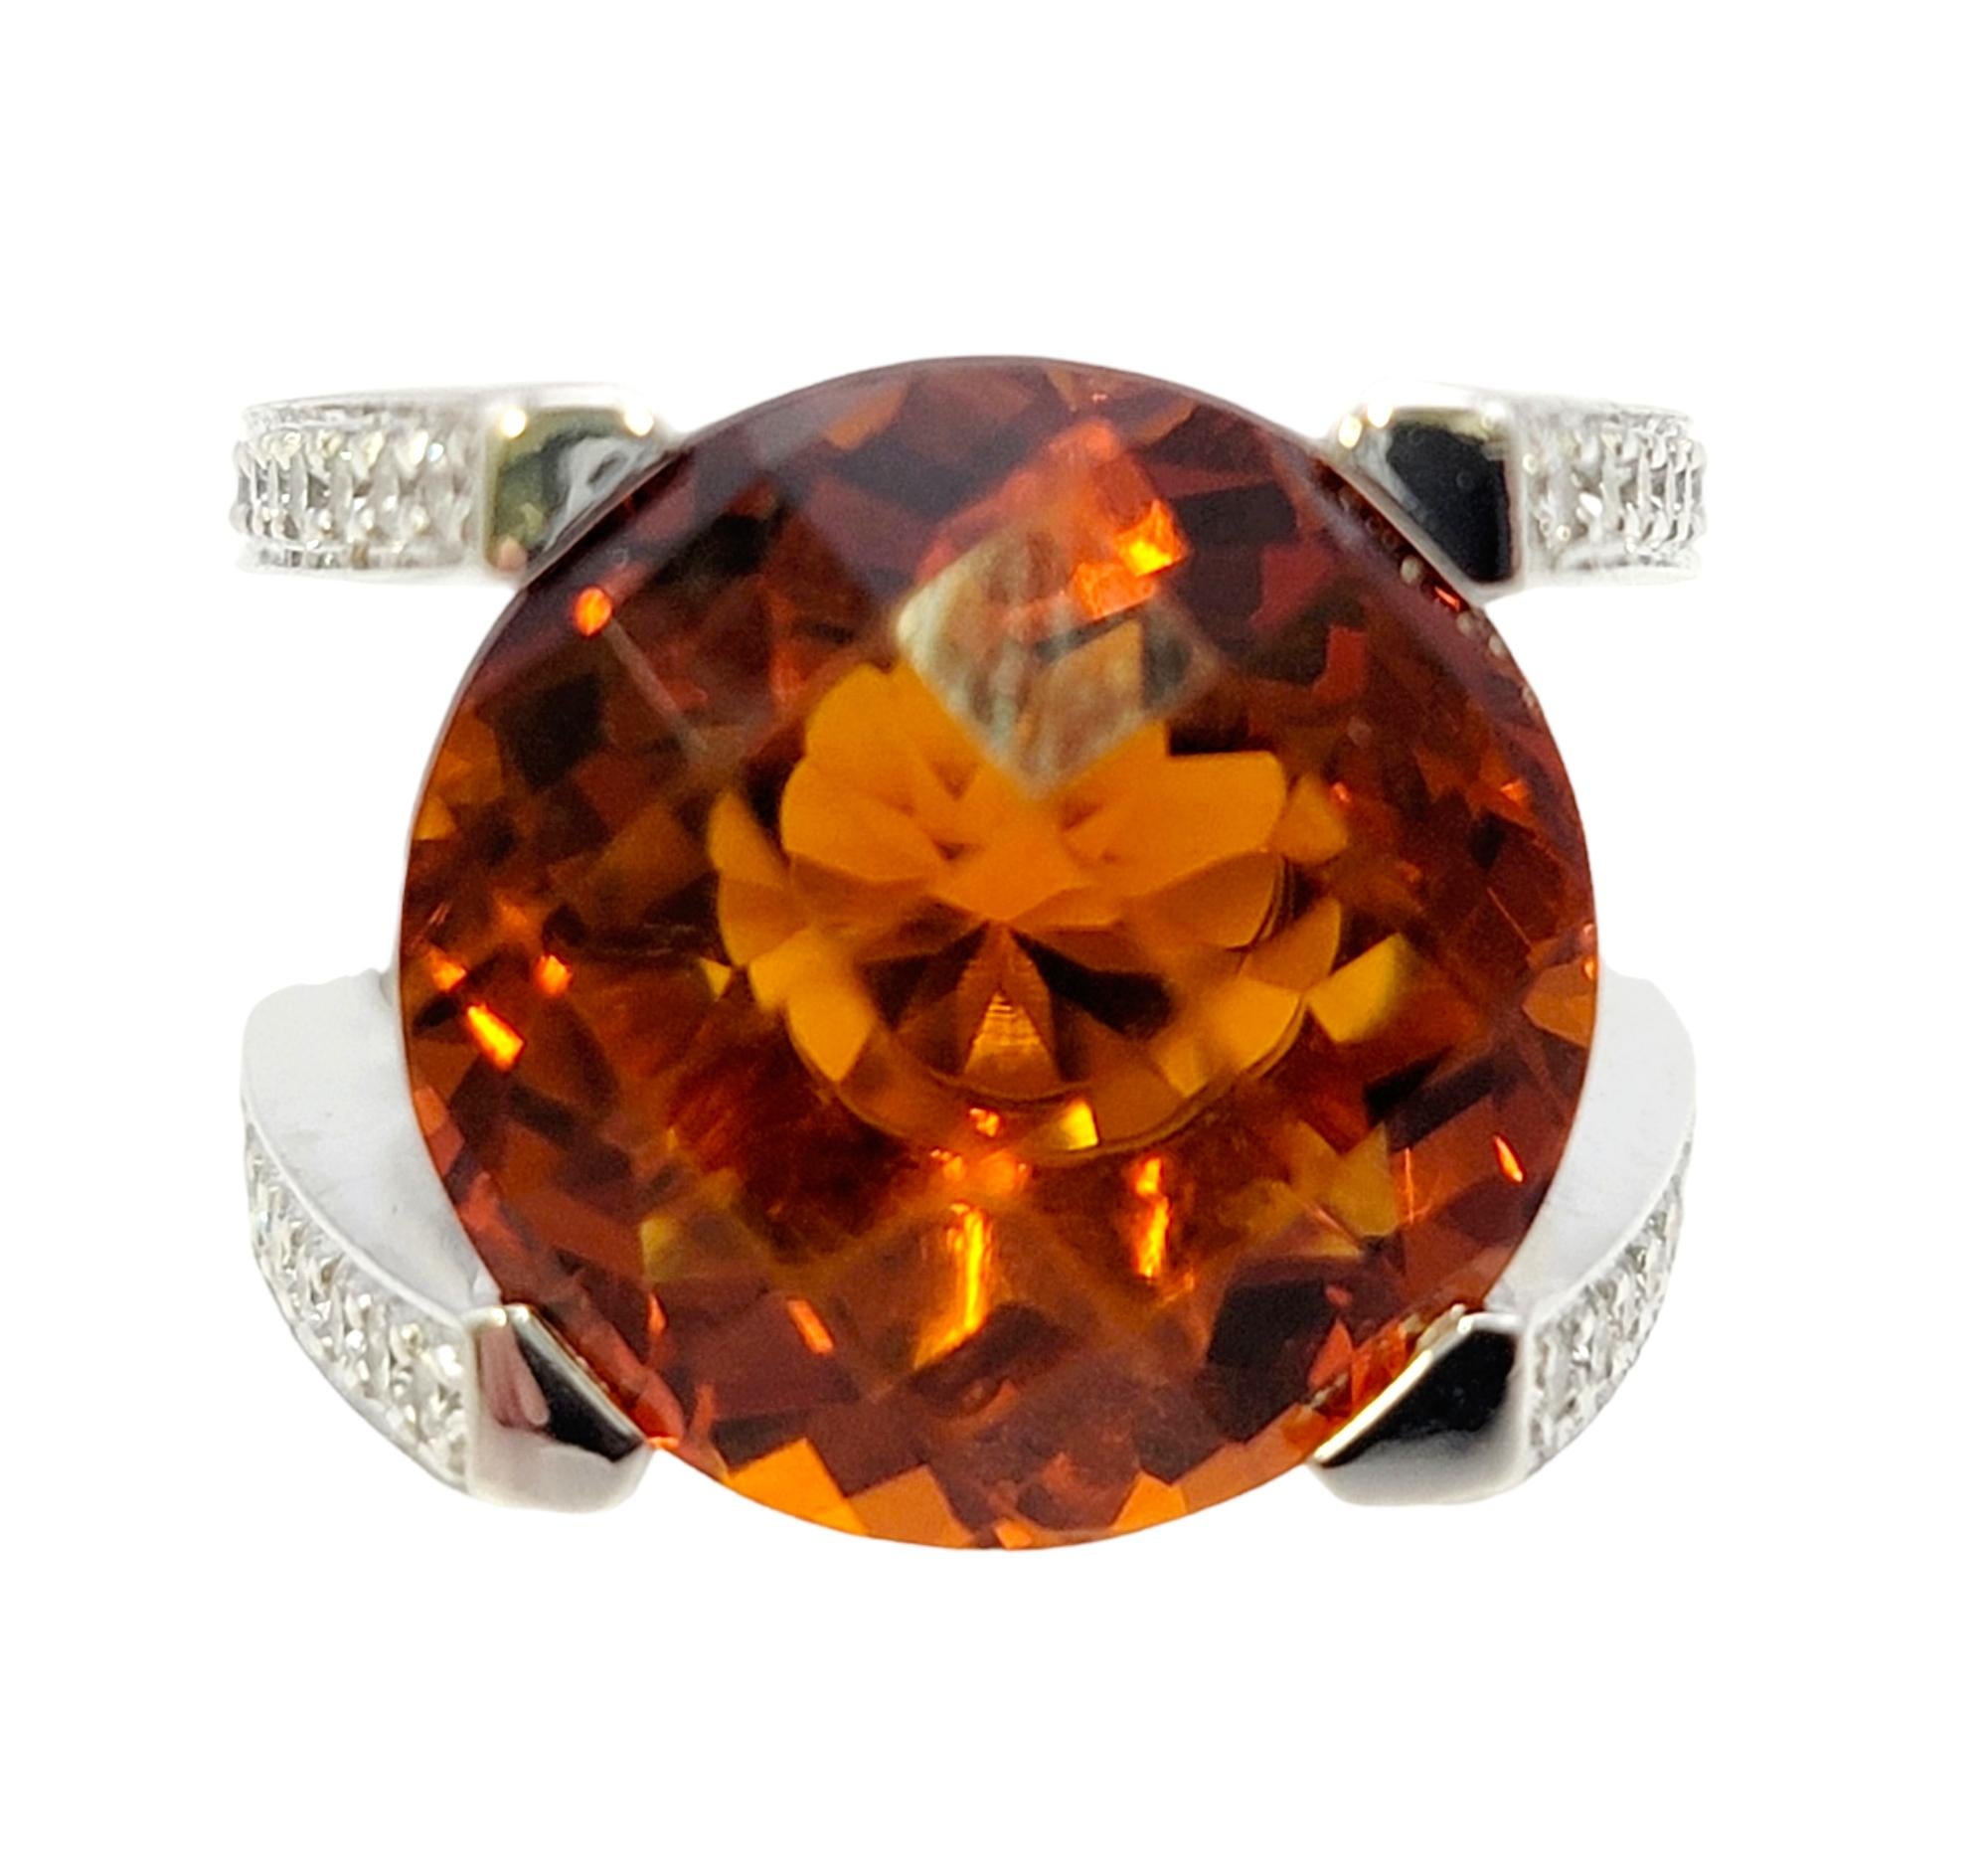 Ring size: 7.25

This eye-catching citrine and diamond ring by Scott Gauthier is a real showstopper! Bold in size, color and design, this stunning statement piece sits high off the finger, demanding the viewers attention. The large round cut citrine